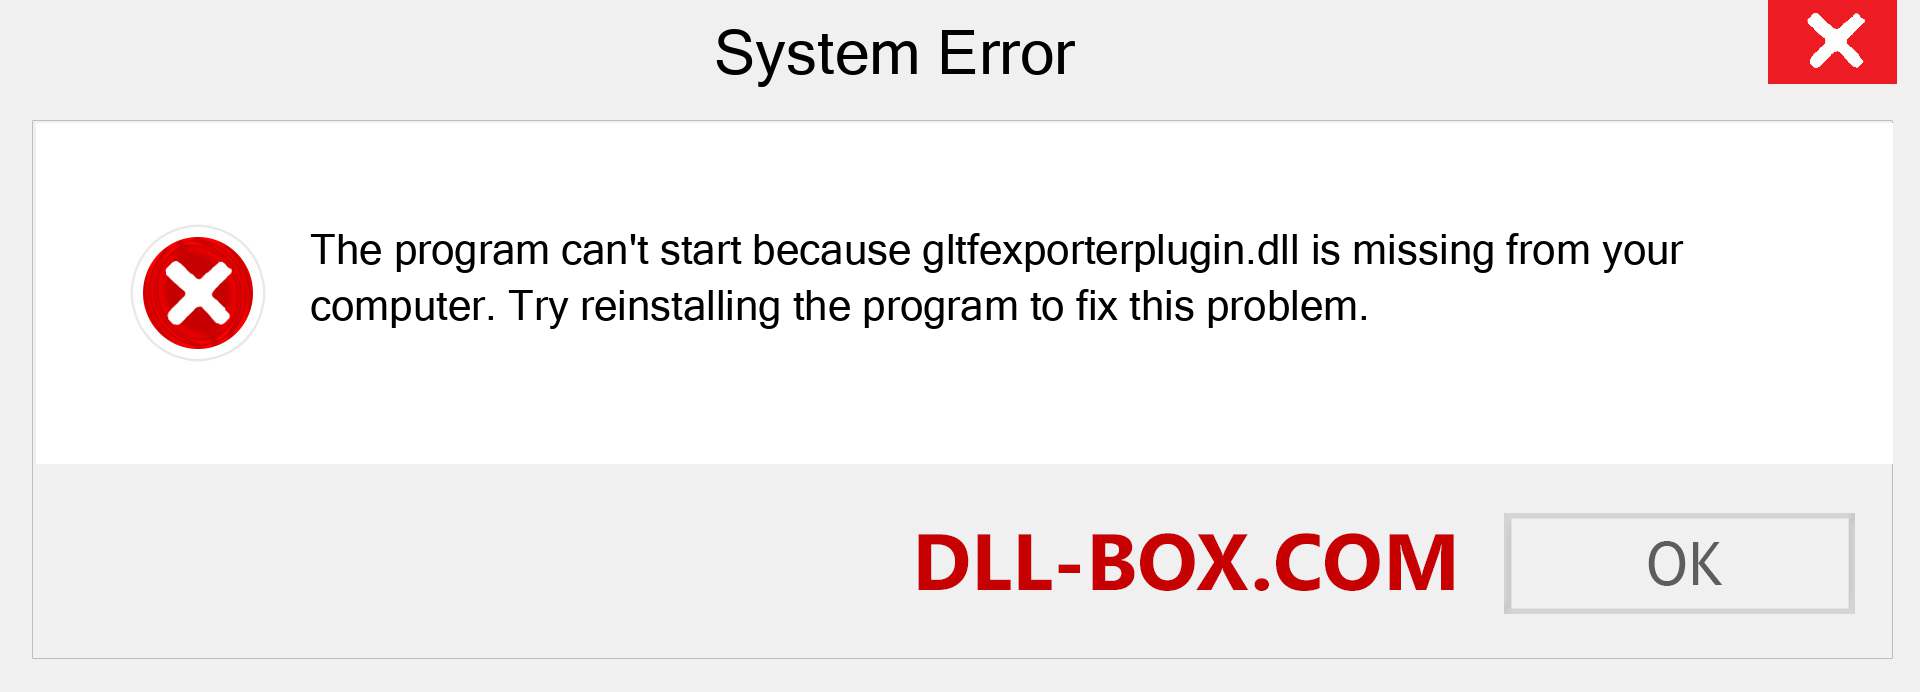  gltfexporterplugin.dll file is missing?. Download for Windows 7, 8, 10 - Fix  gltfexporterplugin dll Missing Error on Windows, photos, images